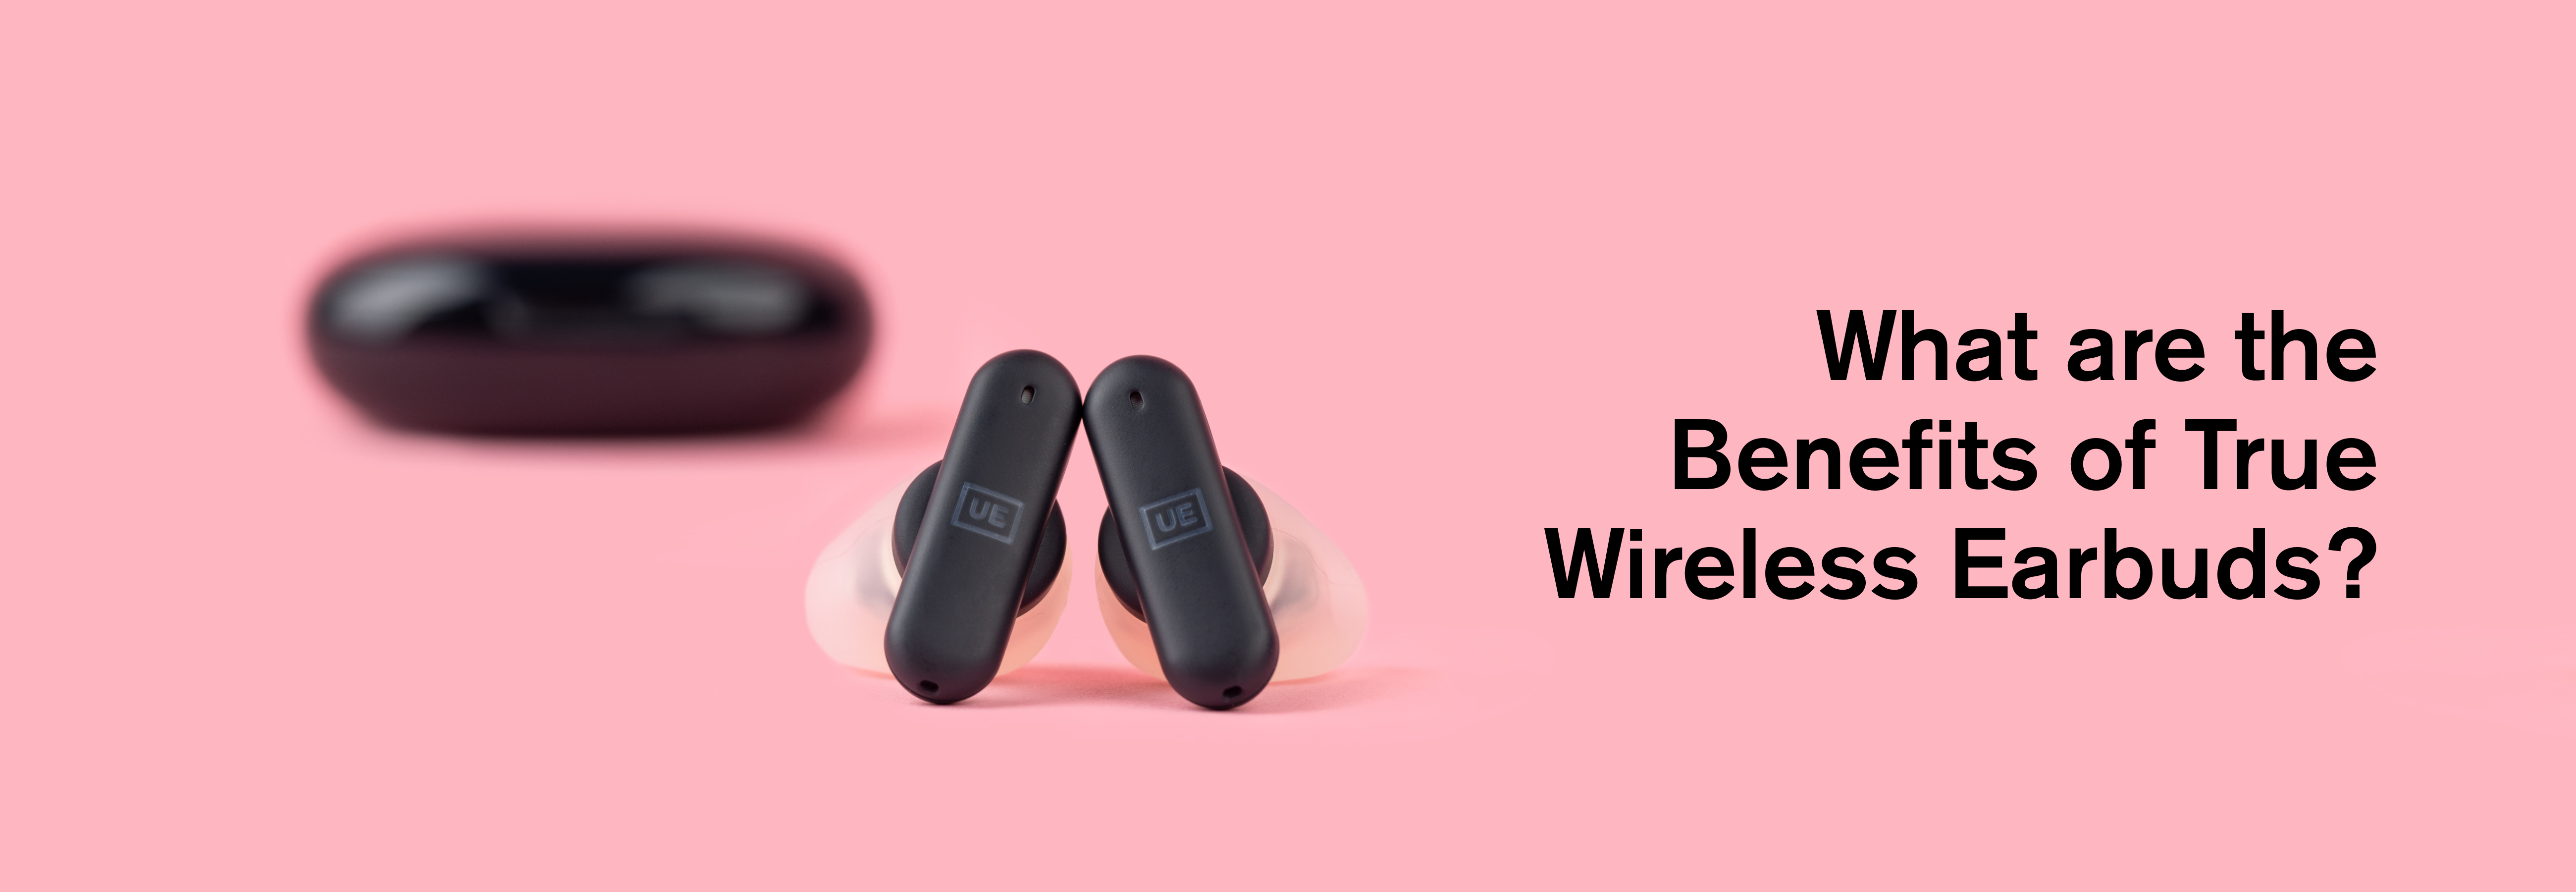 What are the Benefits of True Wireless Earbuds?